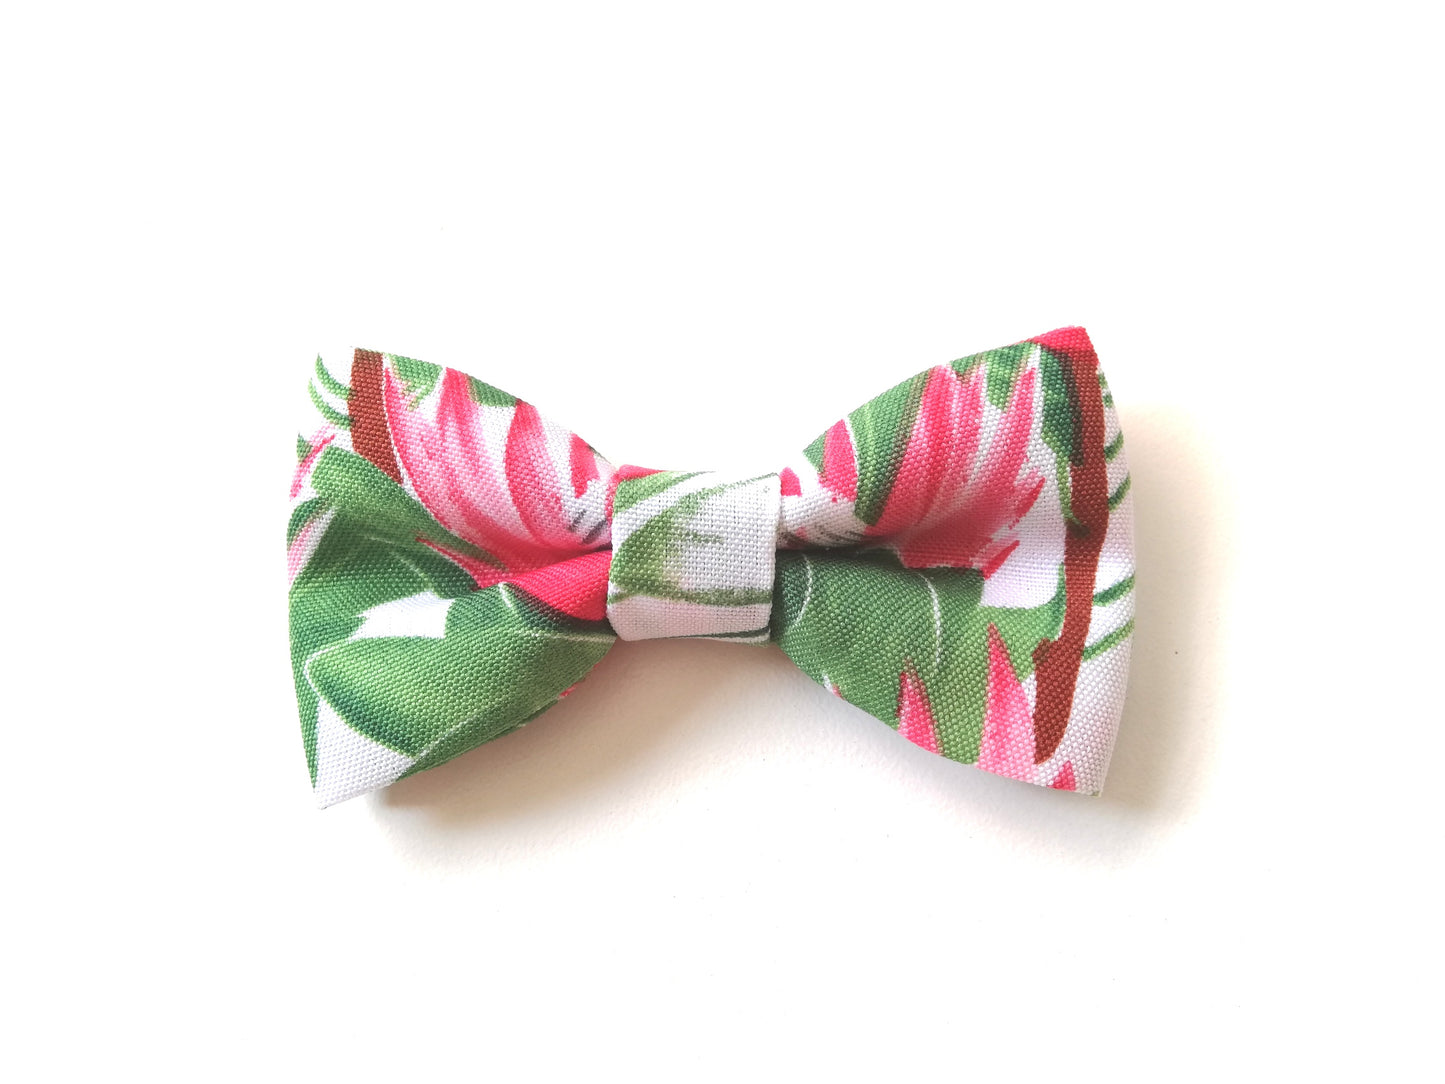 Handcrafted Protea Floral Bow Tie